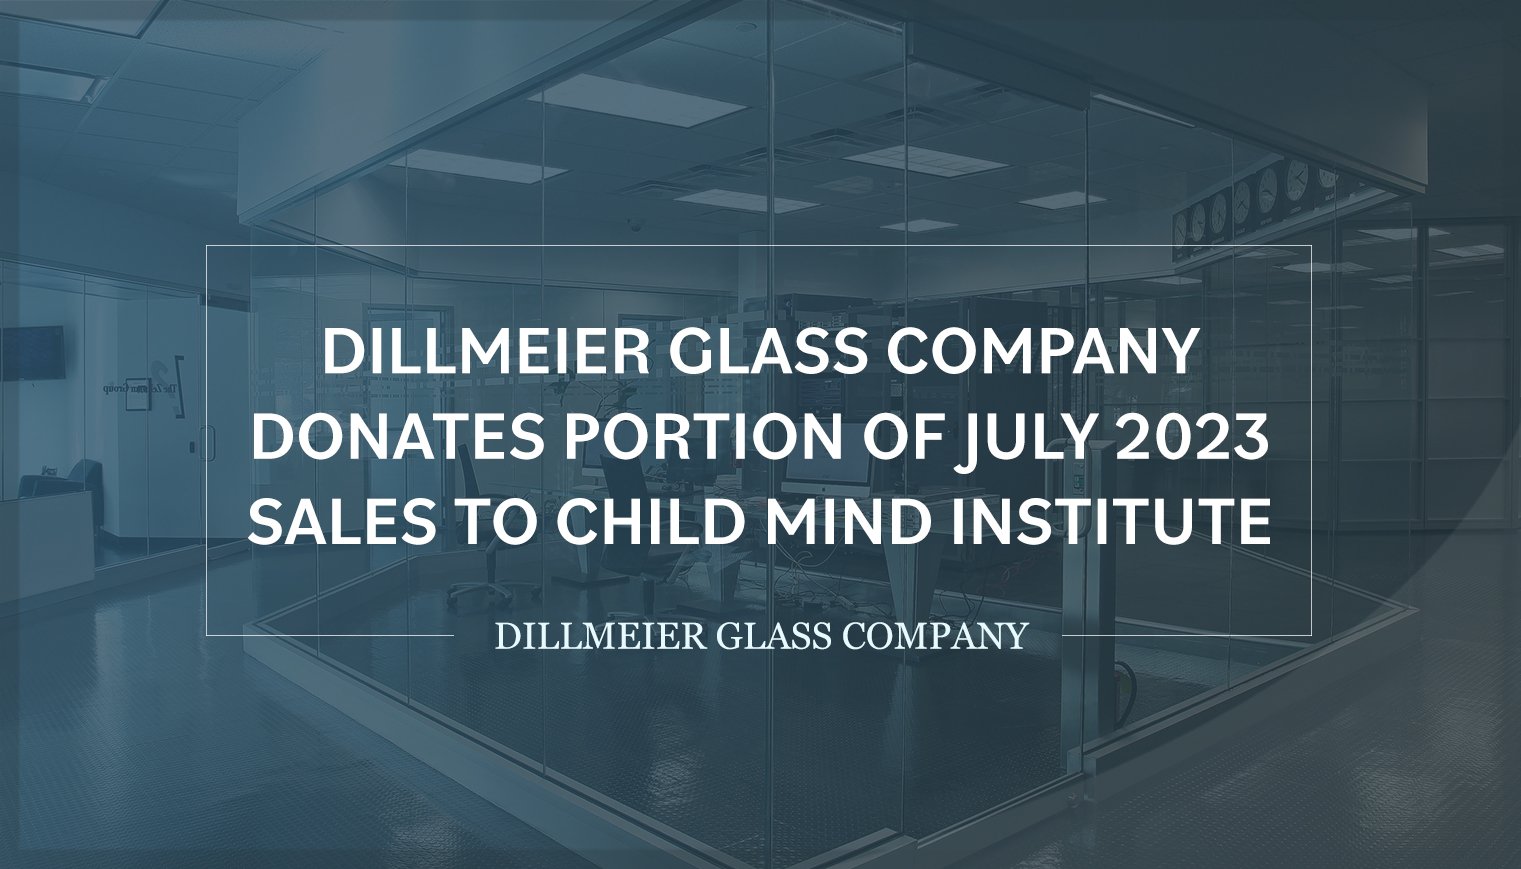 Glass office windows with text - Dillmeier Glass Company Donates Portion of July 2023 Sales to Child Mind Institute